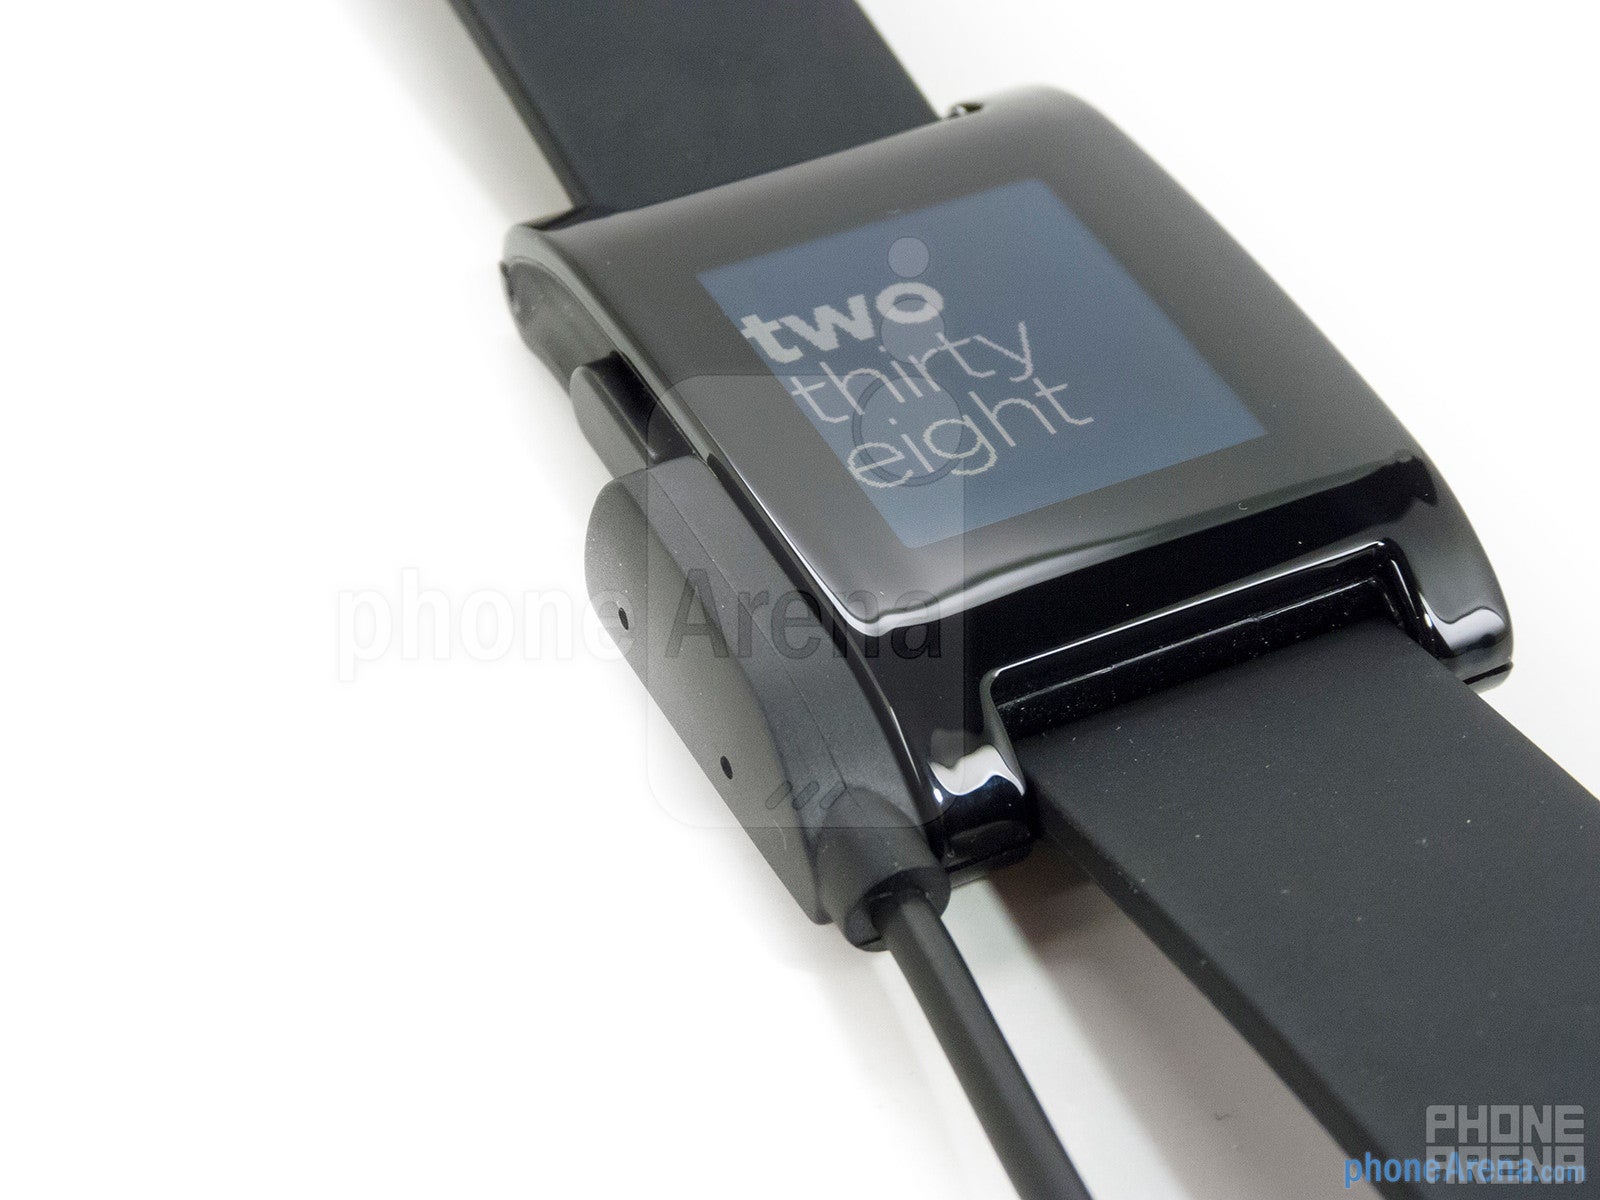 Pebble Smart Watch Review